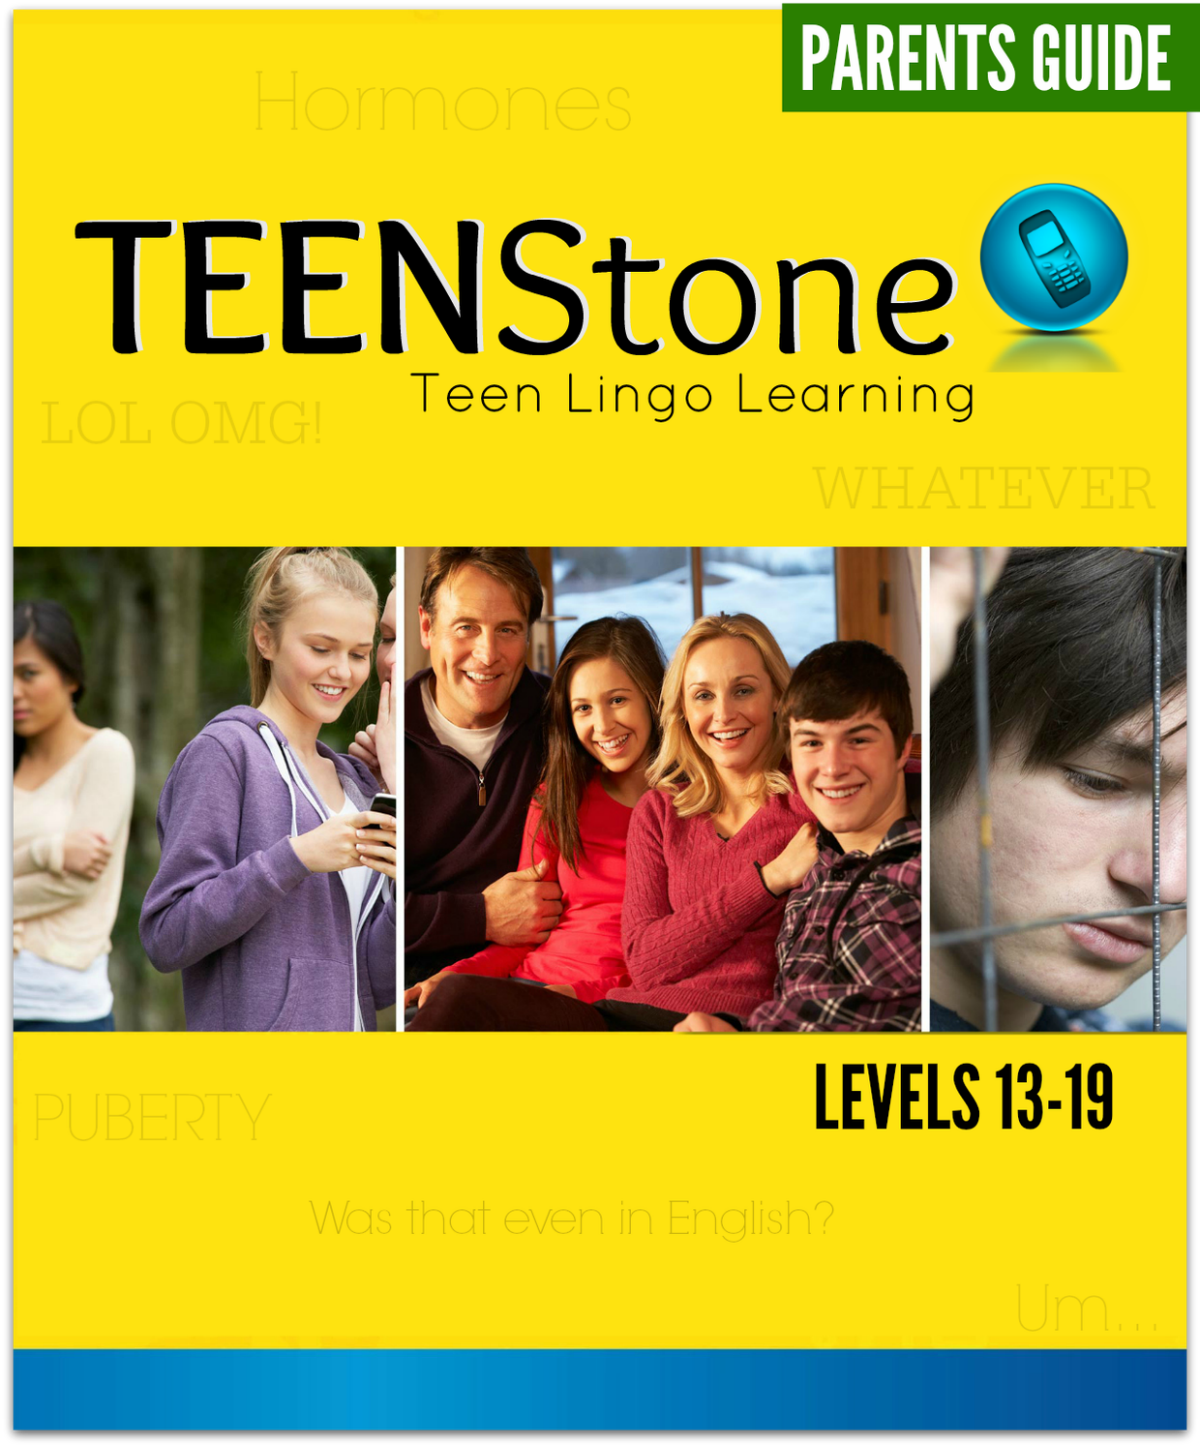 teenstone for parents guide hip2save